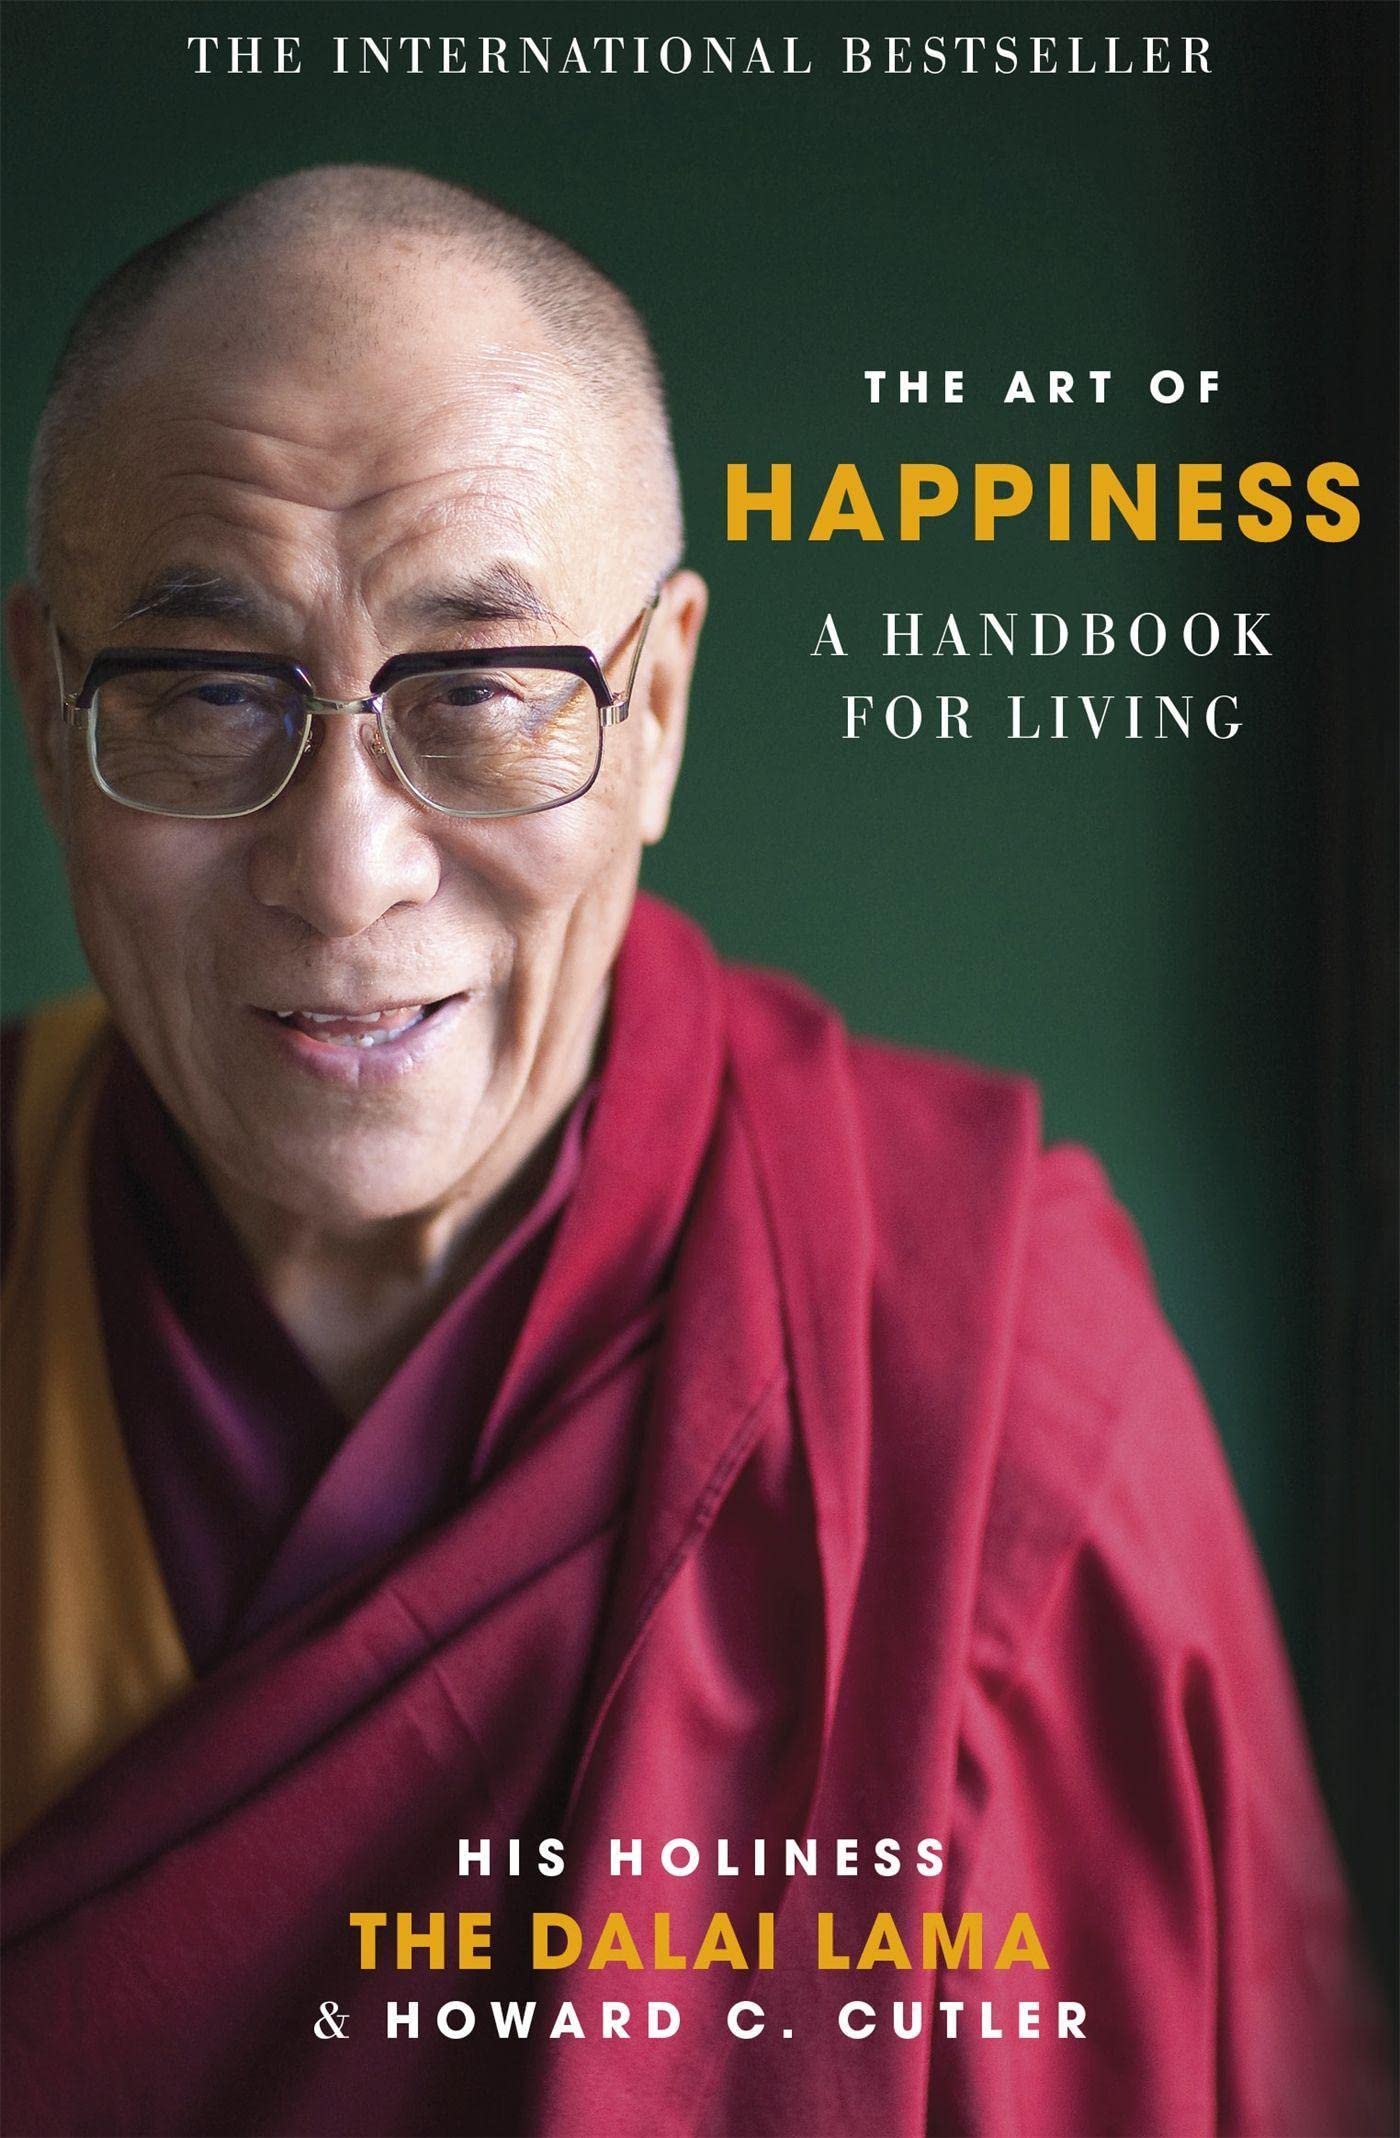 The Art of Happiness: A Handbook for Living by The Dalai Lama & Howard C. Cutler - Lets Buy Books